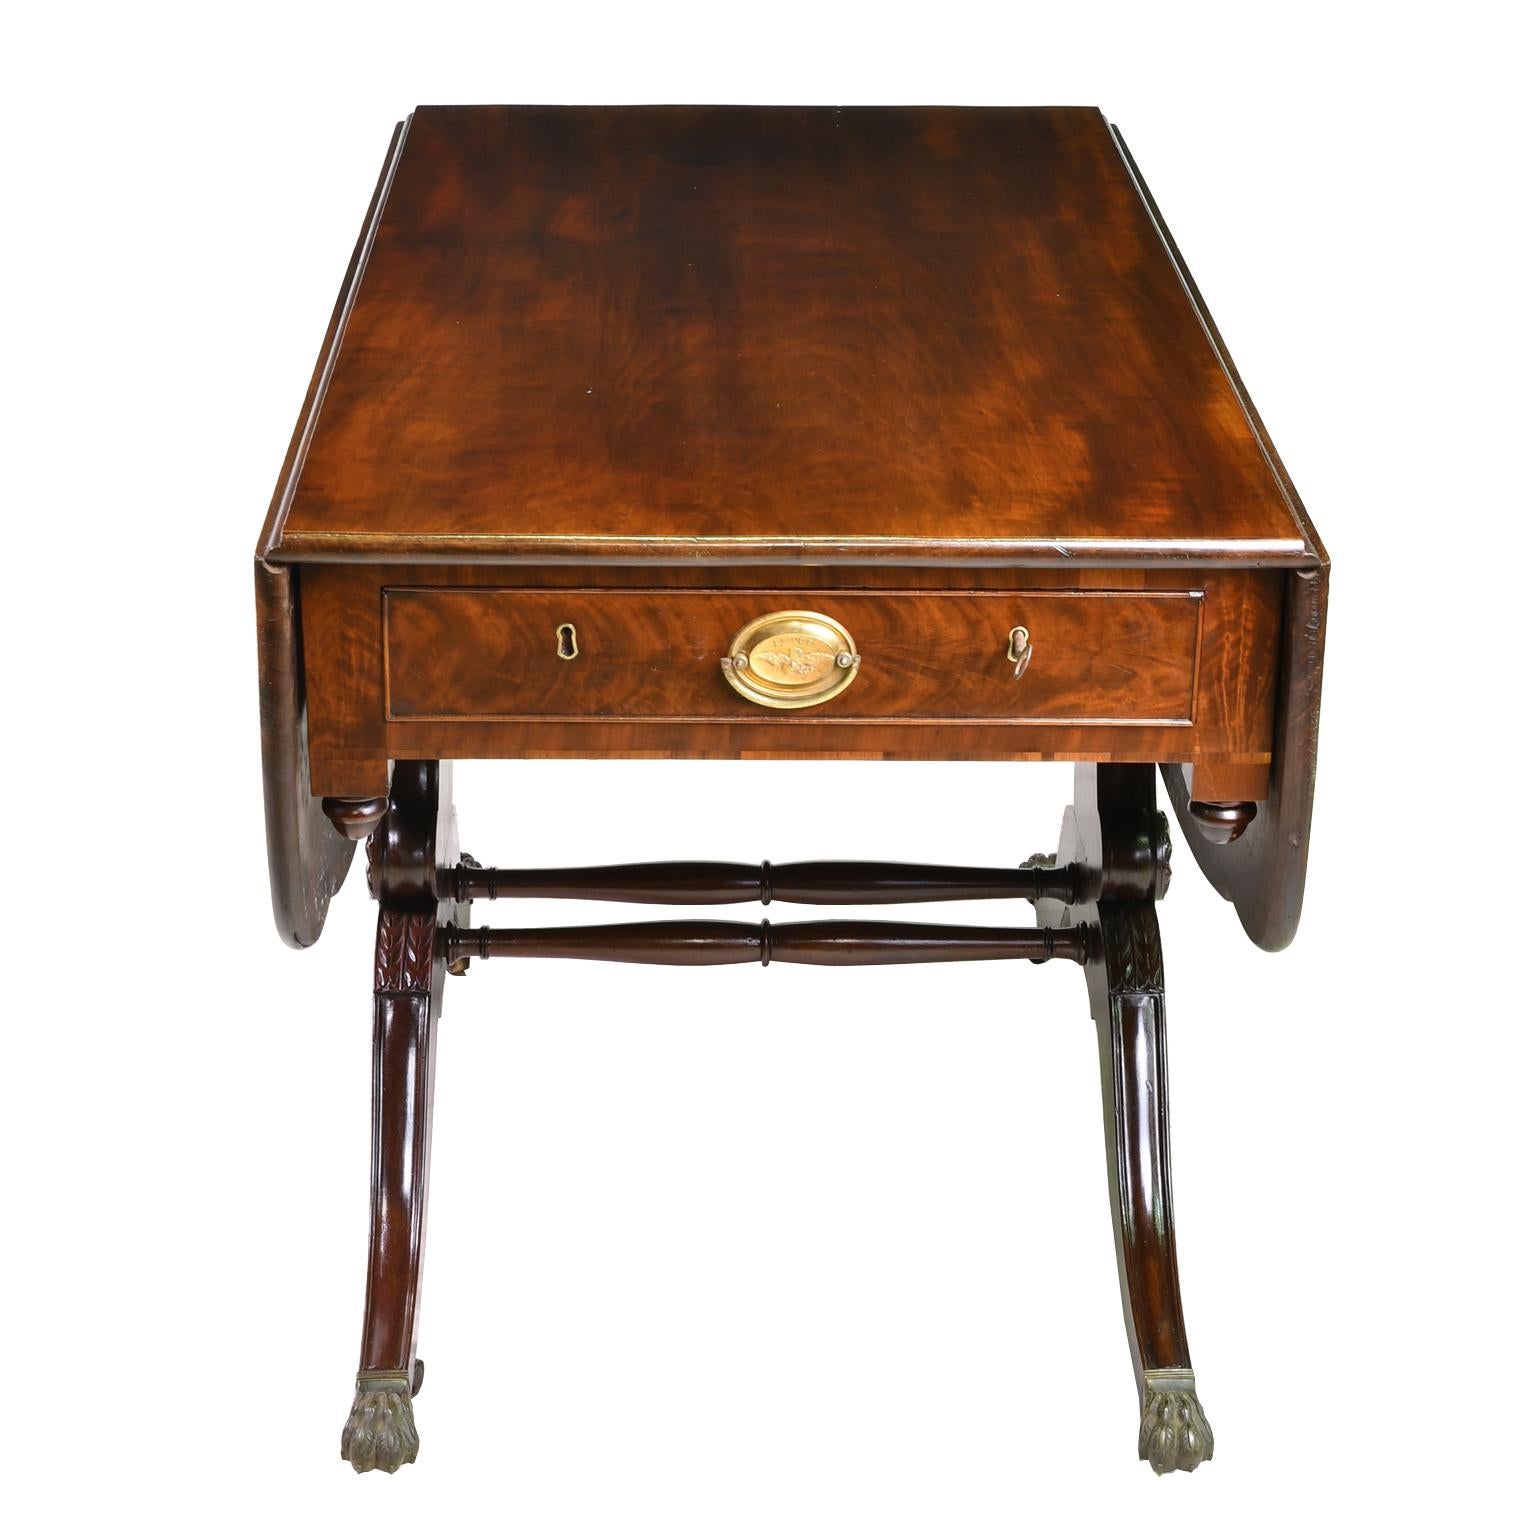 A fine example of an American Federal drop-leaf table in West Indies mahogany, from New York, circa 1810. The solid rectangular top with curved drop-leaves features a beautiful figured grain and is supported by two solid standards in the lyre form